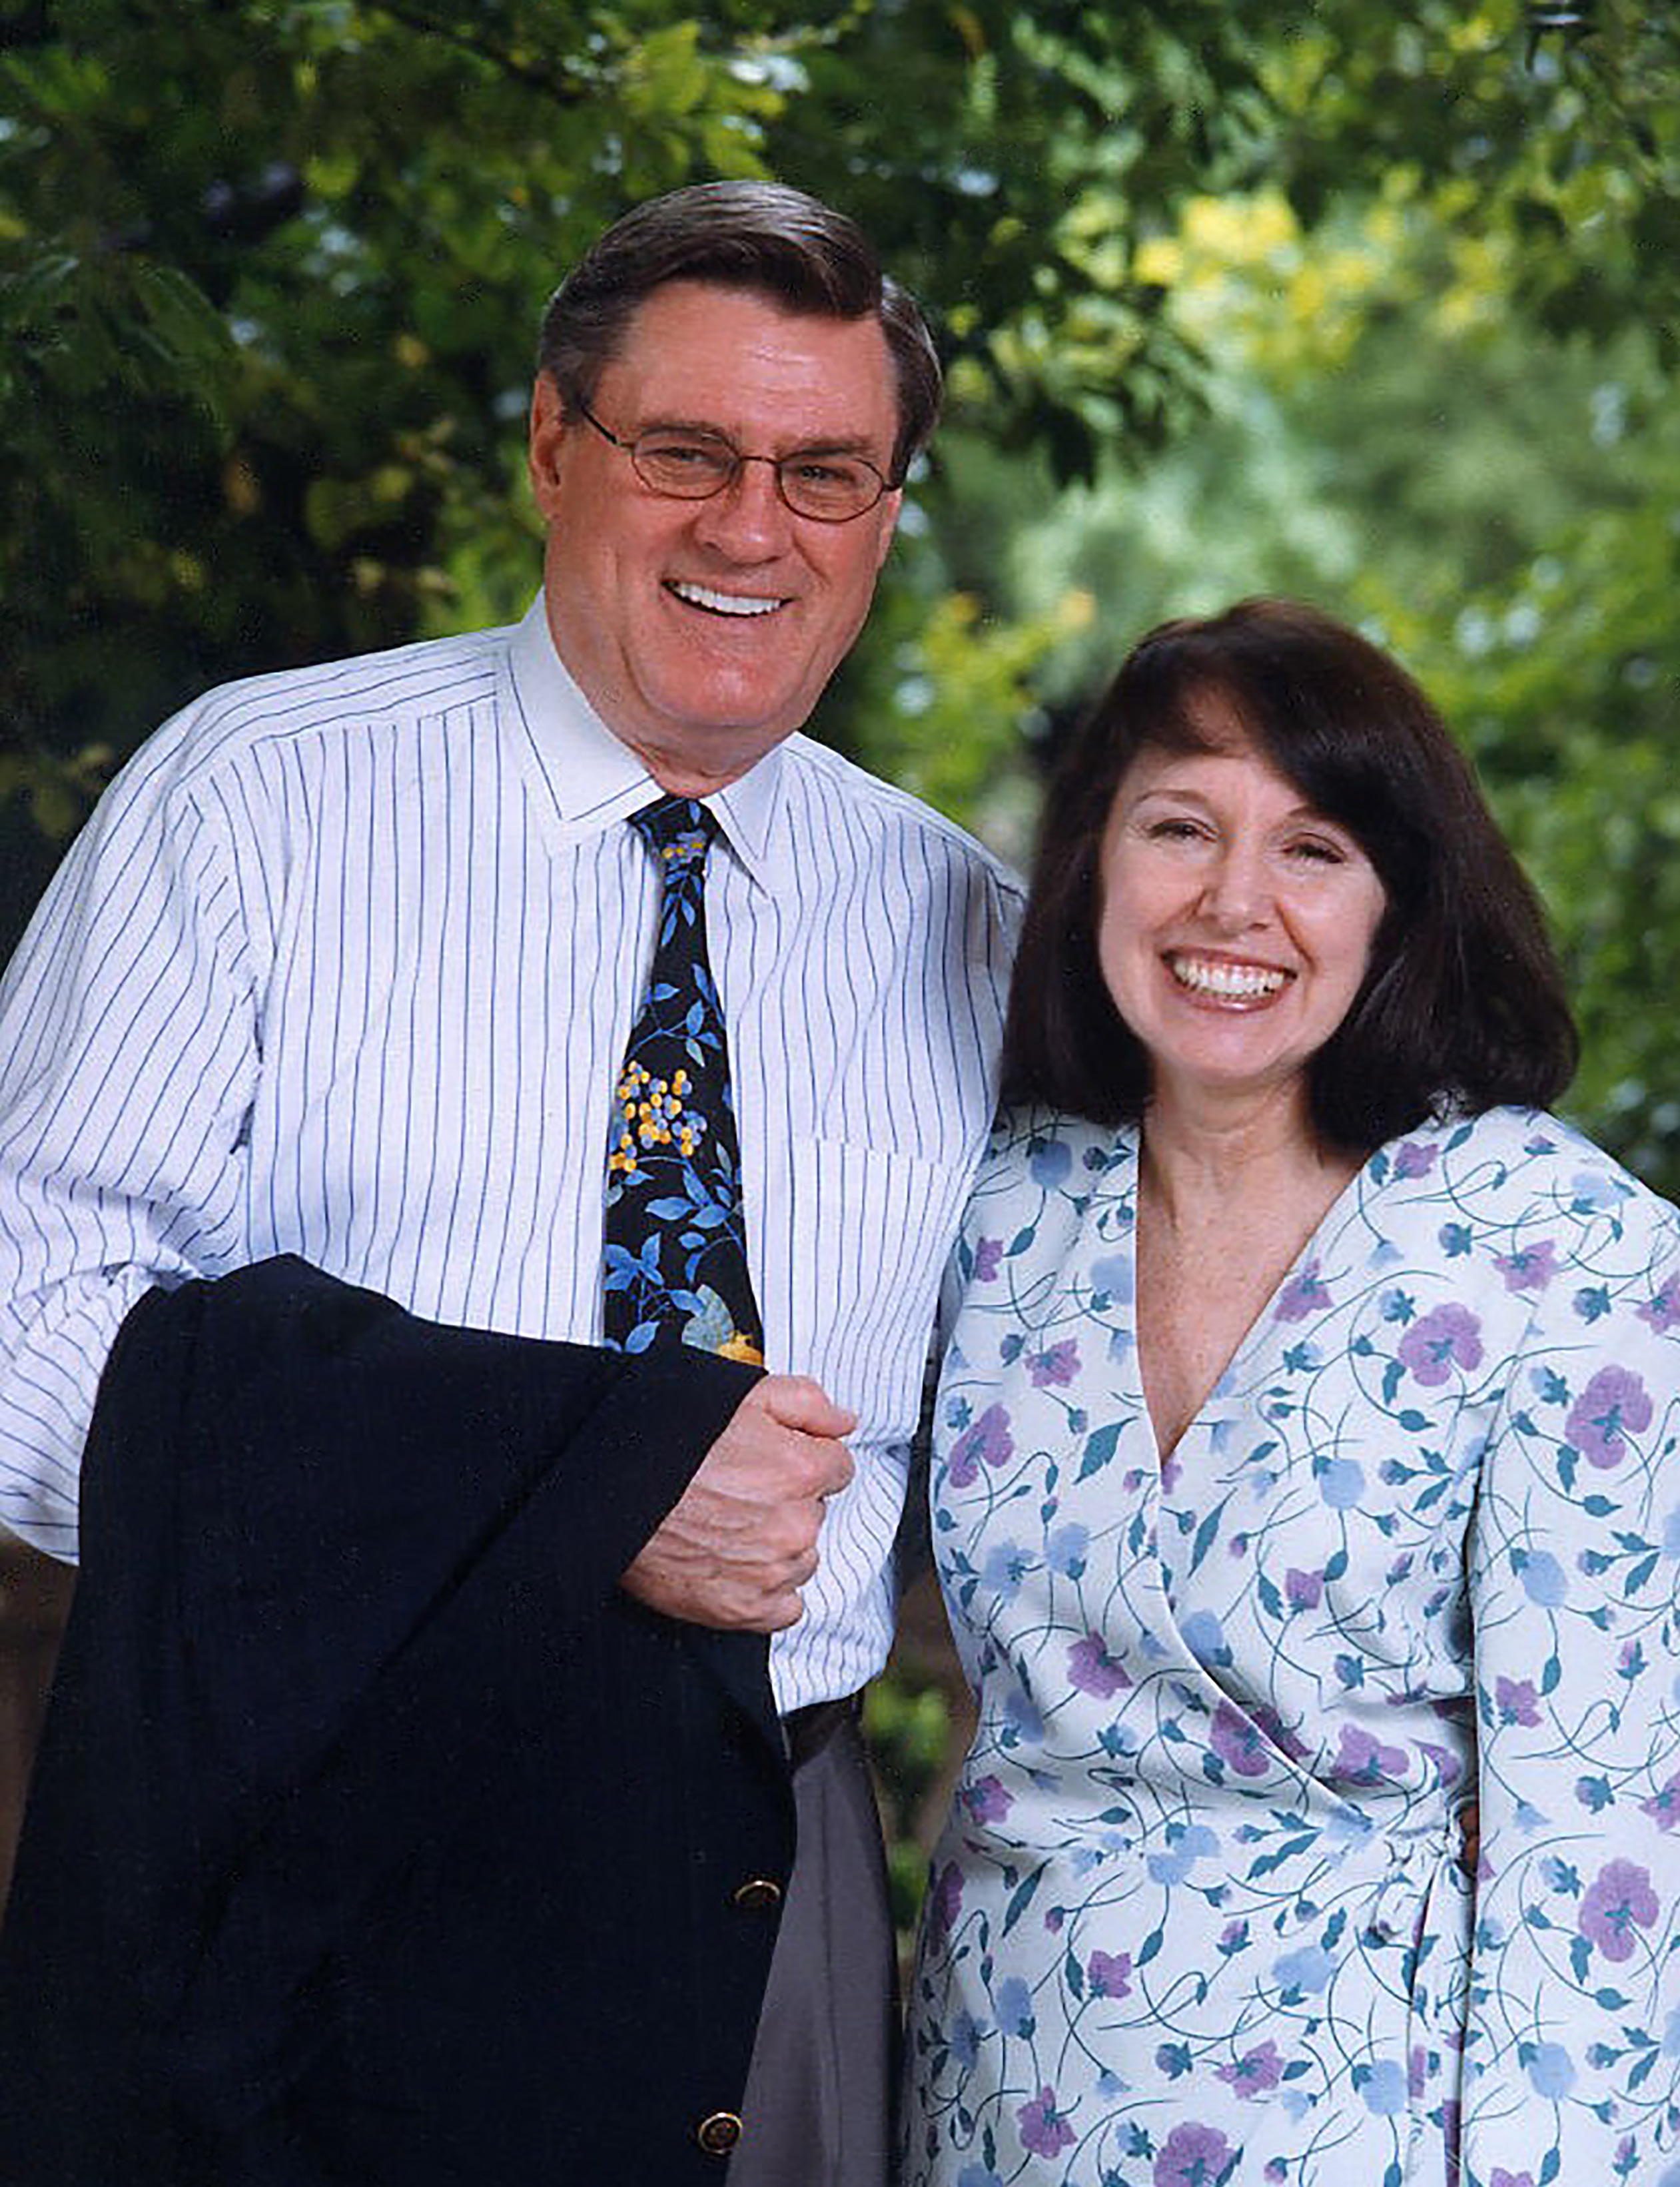 Jack Gill and Linda Gill pose for a photo